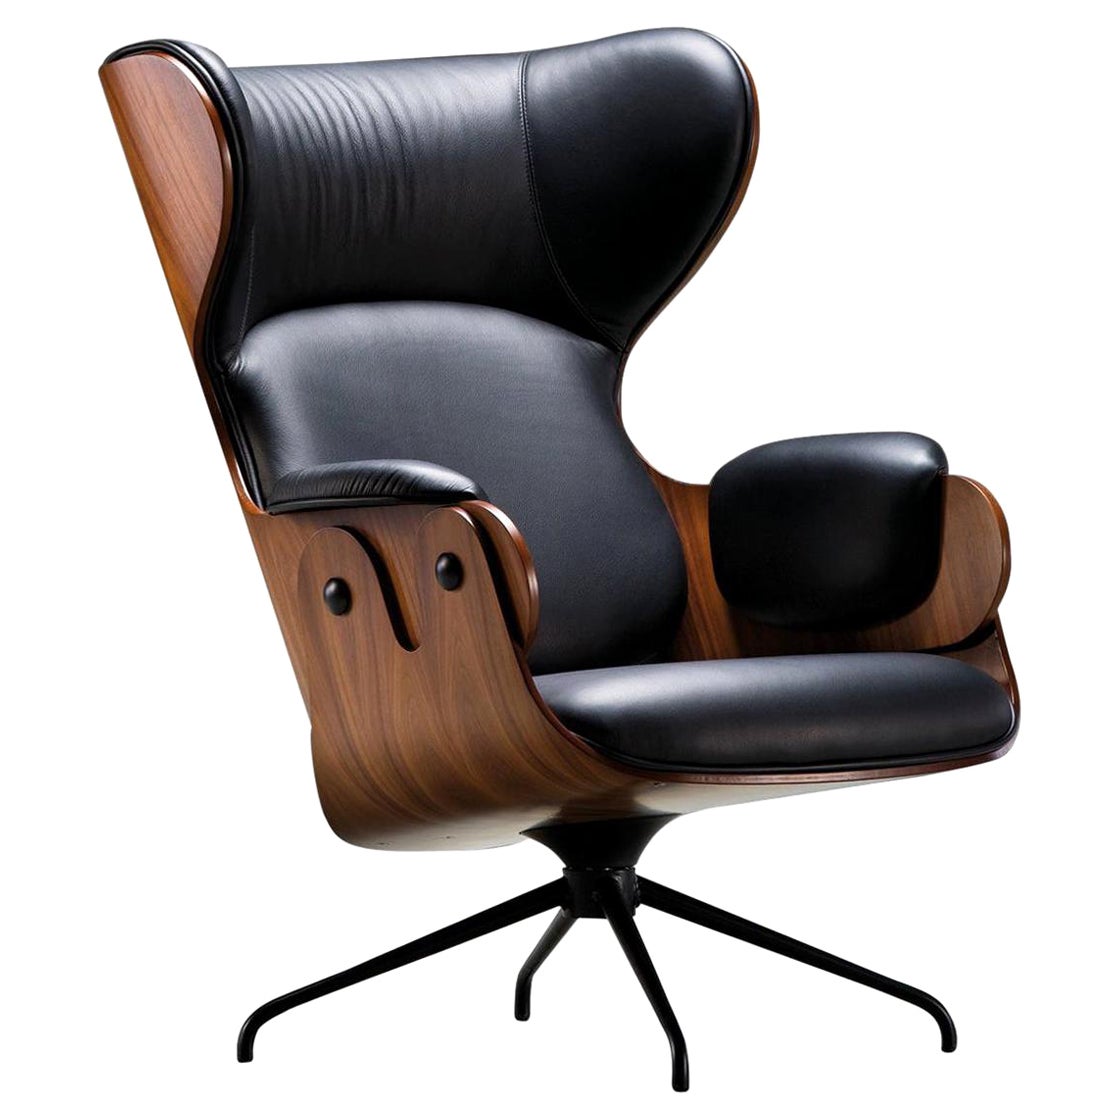 Jaime Hayon, Contemporary, Playwood Walnut Leather Upholstery Lounger Armchair